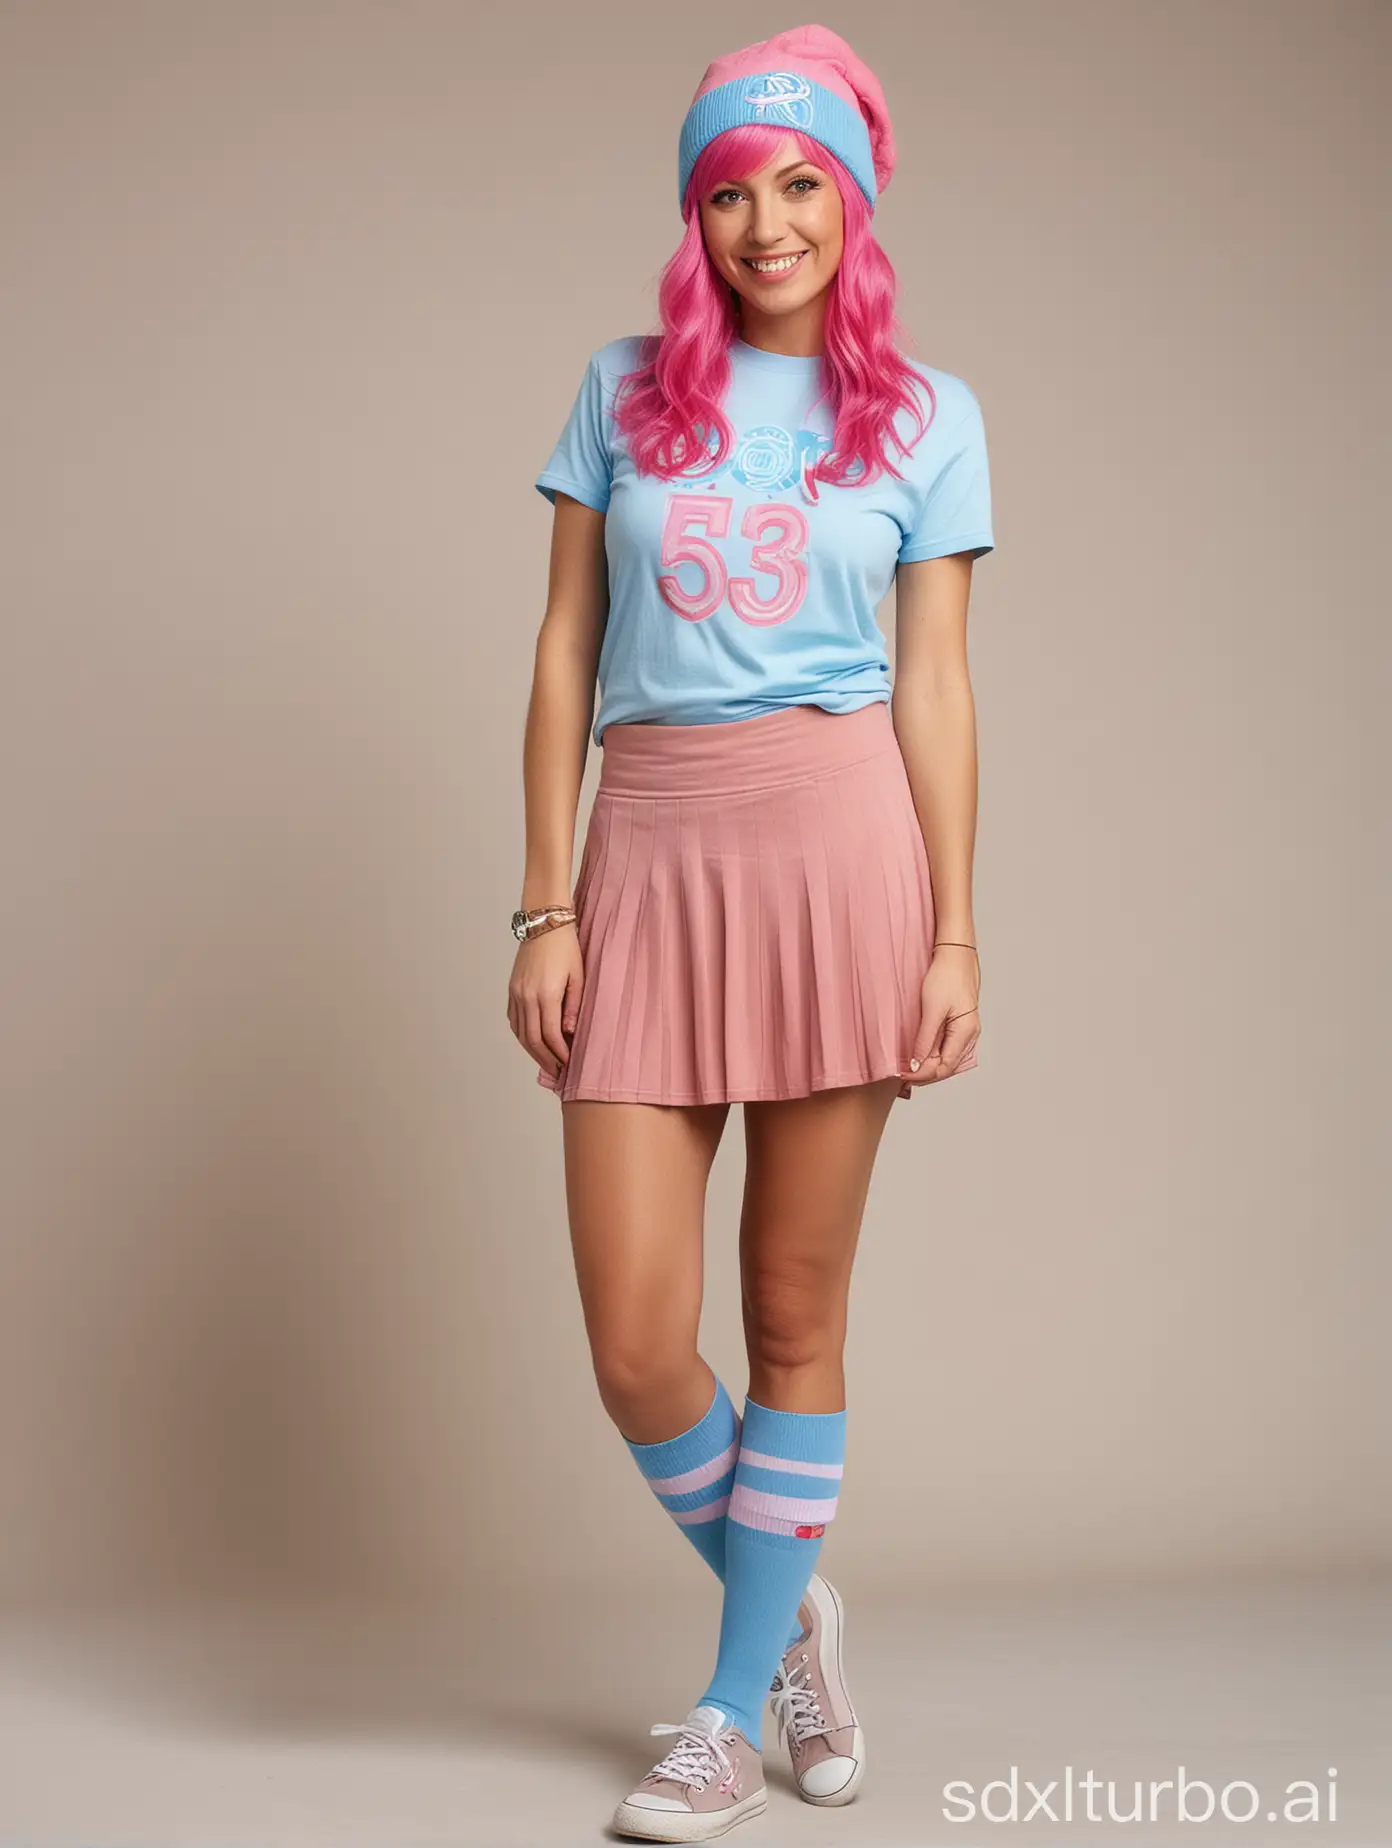 Stylish-MiddleAged-Swiss-Woman-in-Pink-Wig-and-Teen-Spirit-Attire-Smiling